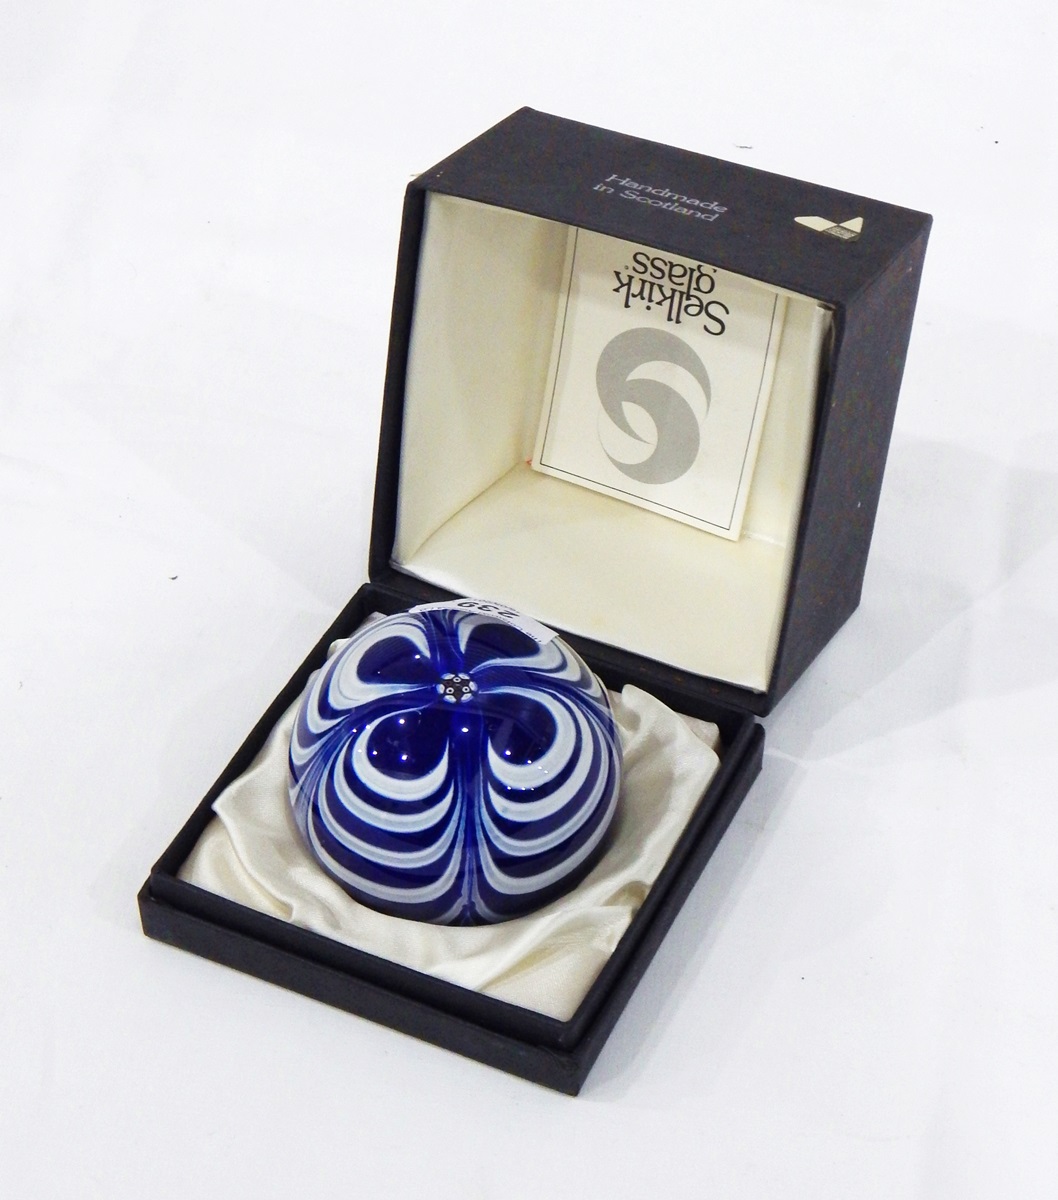 Selkirk glass paperweight, 'Marbrie Blue', titled, numbered 54/450 and dated 1979, with paper label, - Image 5 of 5